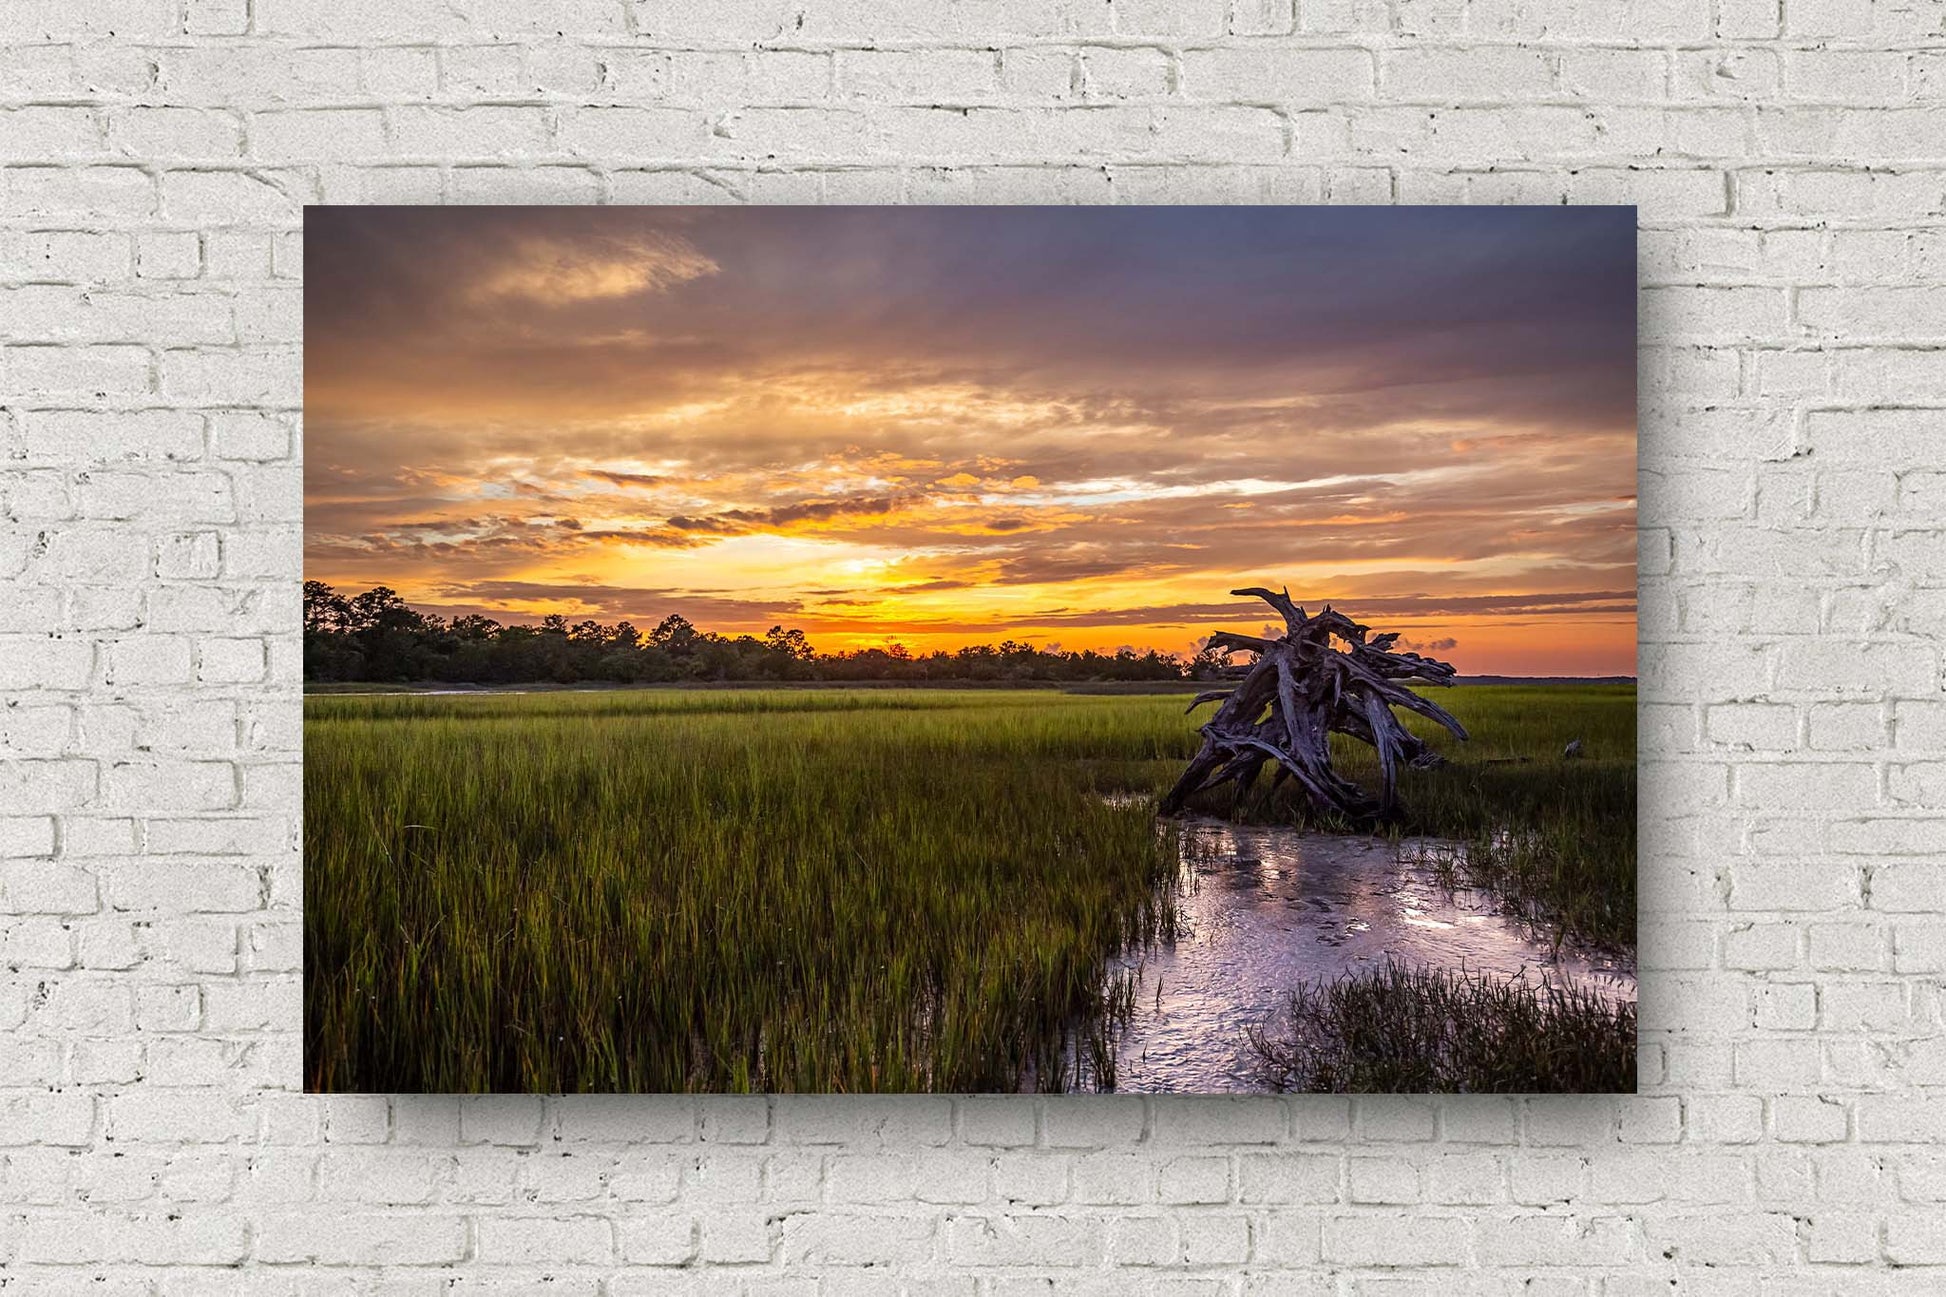 Coastal metal print of a warm sunset taking place over a salt marsh on a summer evening in the lowcountry of South Carolina by Sean Ramsey of Southern Plains Photography.